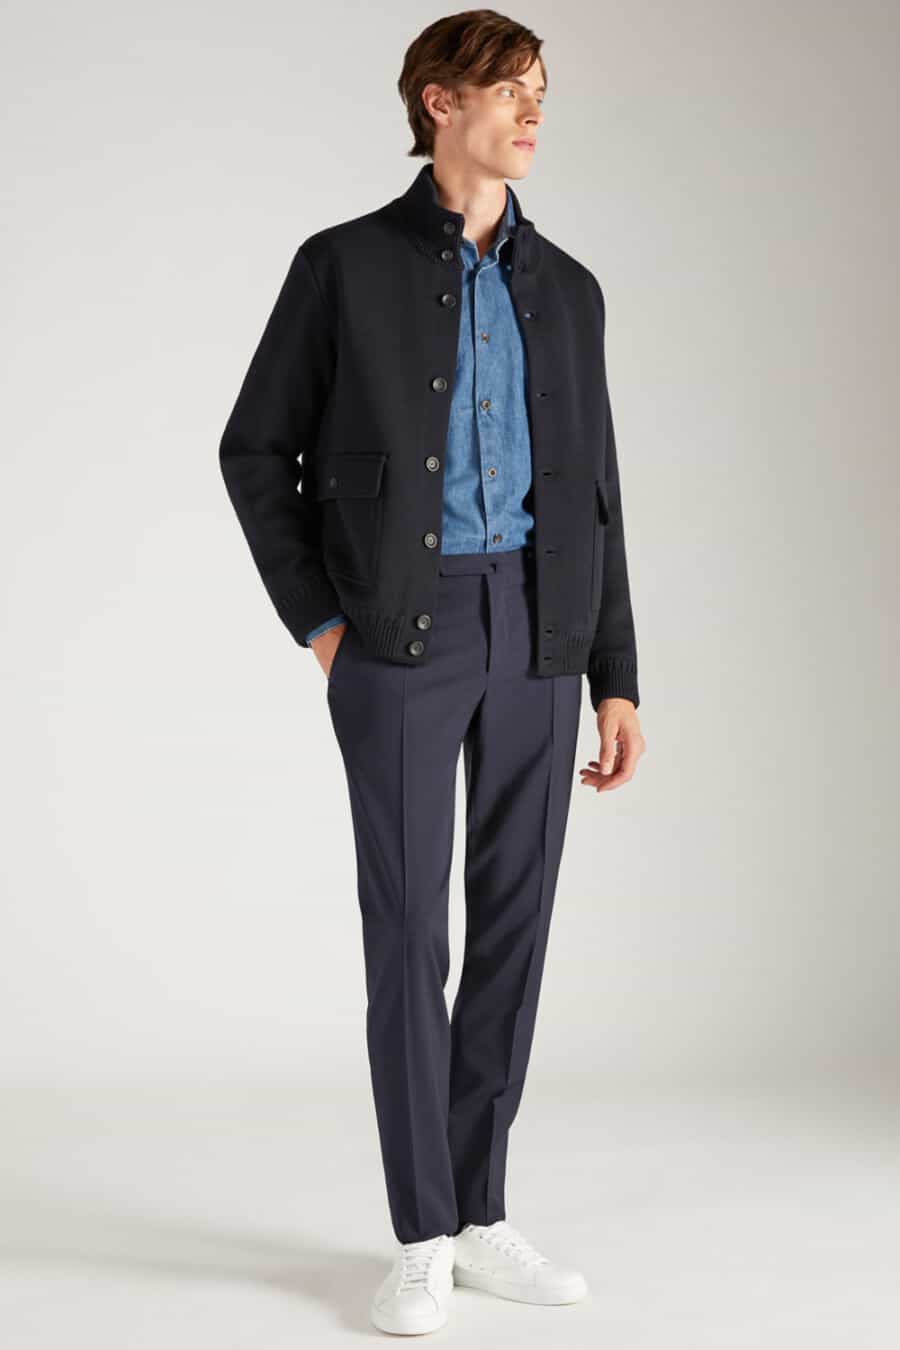 Men's navy tailored pants, blue denim shirt, navy wool bomber jacket and white sneakers outfit